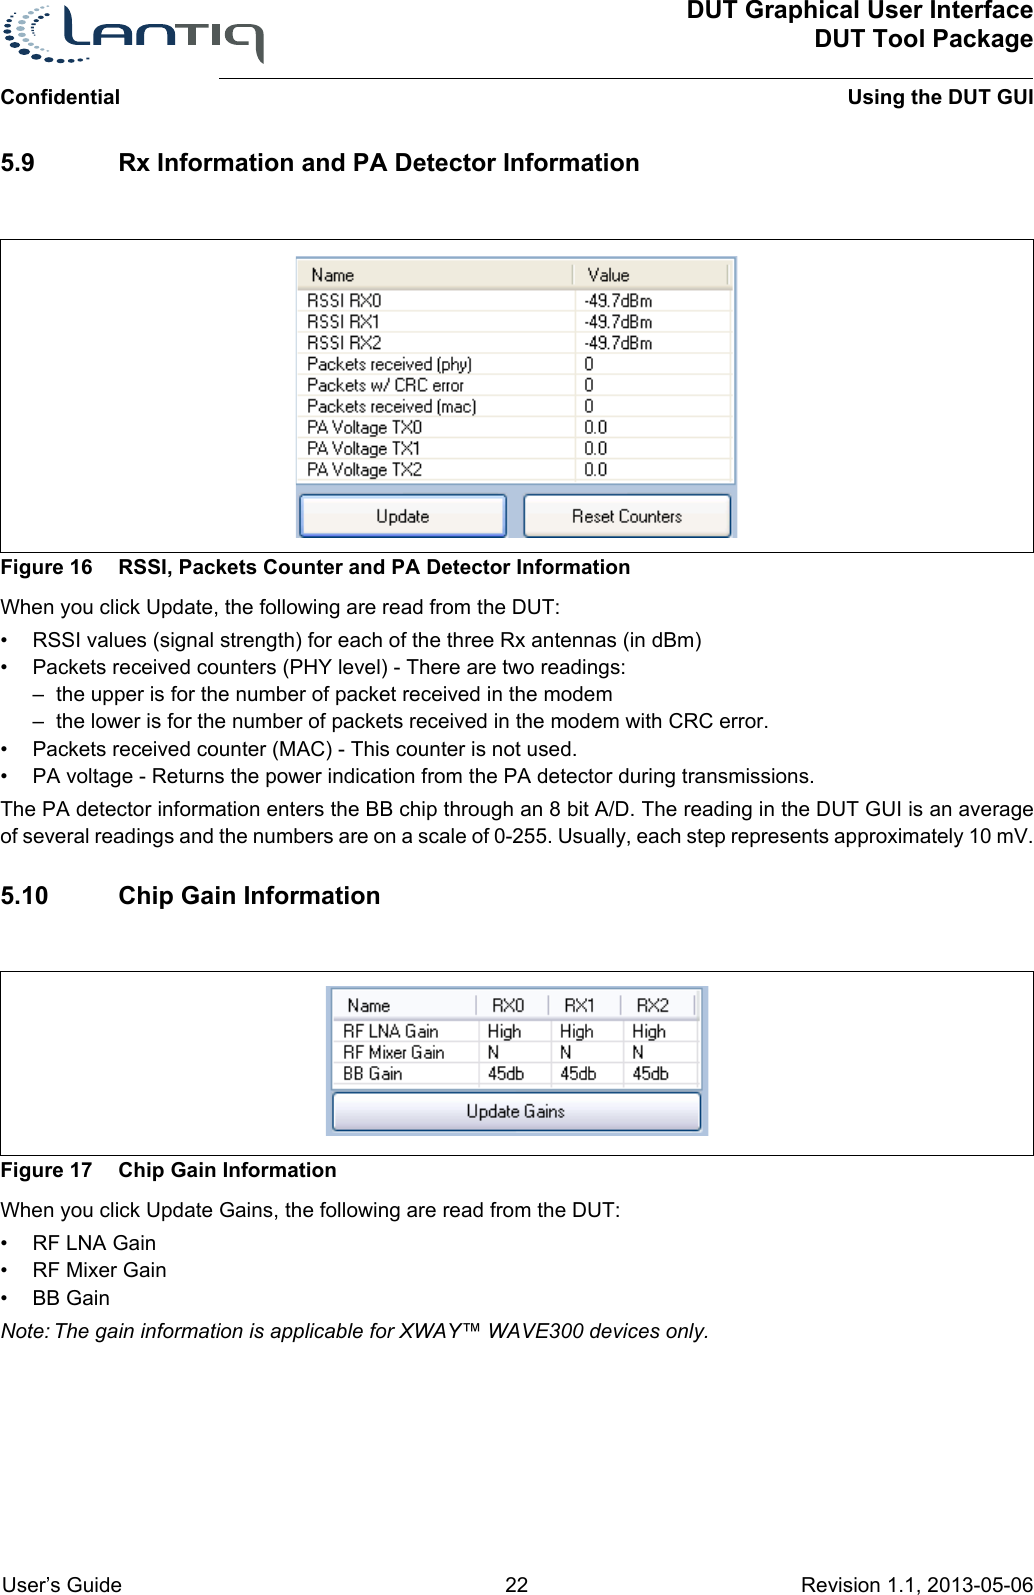 ConfidentialDUT Graphical User InterfaceDUT Tool PackageUsing the DUT GUI User’s Guide 22 Revision 1.1, 2013-05-06      5.9 Rx Information and PA Detector InformationFigure 16 RSSI, Packets Counter and PA Detector InformationWhen you click Update, the following are read from the DUT:• RSSI values (signal strength) for each of the three Rx antennas (in dBm)• Packets received counters (PHY level) - There are two readings:– the upper is for the number of packet received in the modem– the lower is for the number of packets received in the modem with CRC error.• Packets received counter (MAC) - This counter is not used.• PA voltage - Returns the power indication from the PA detector during transmissions. The PA detector information enters the BB chip through an 8 bit A/D. The reading in the DUT GUI is an average of several readings and the numbers are on a scale of 0-255. Usually, each step represents approximately 10 mV.5.10 Chip Gain InformationFigure 17 Chip Gain InformationWhen you click Update Gains, the following are read from the DUT:•RF LNA Gain• RF Mixer Gain• BB GainNote: The gain information is applicable for XWAY™ WAVE300 devices only.